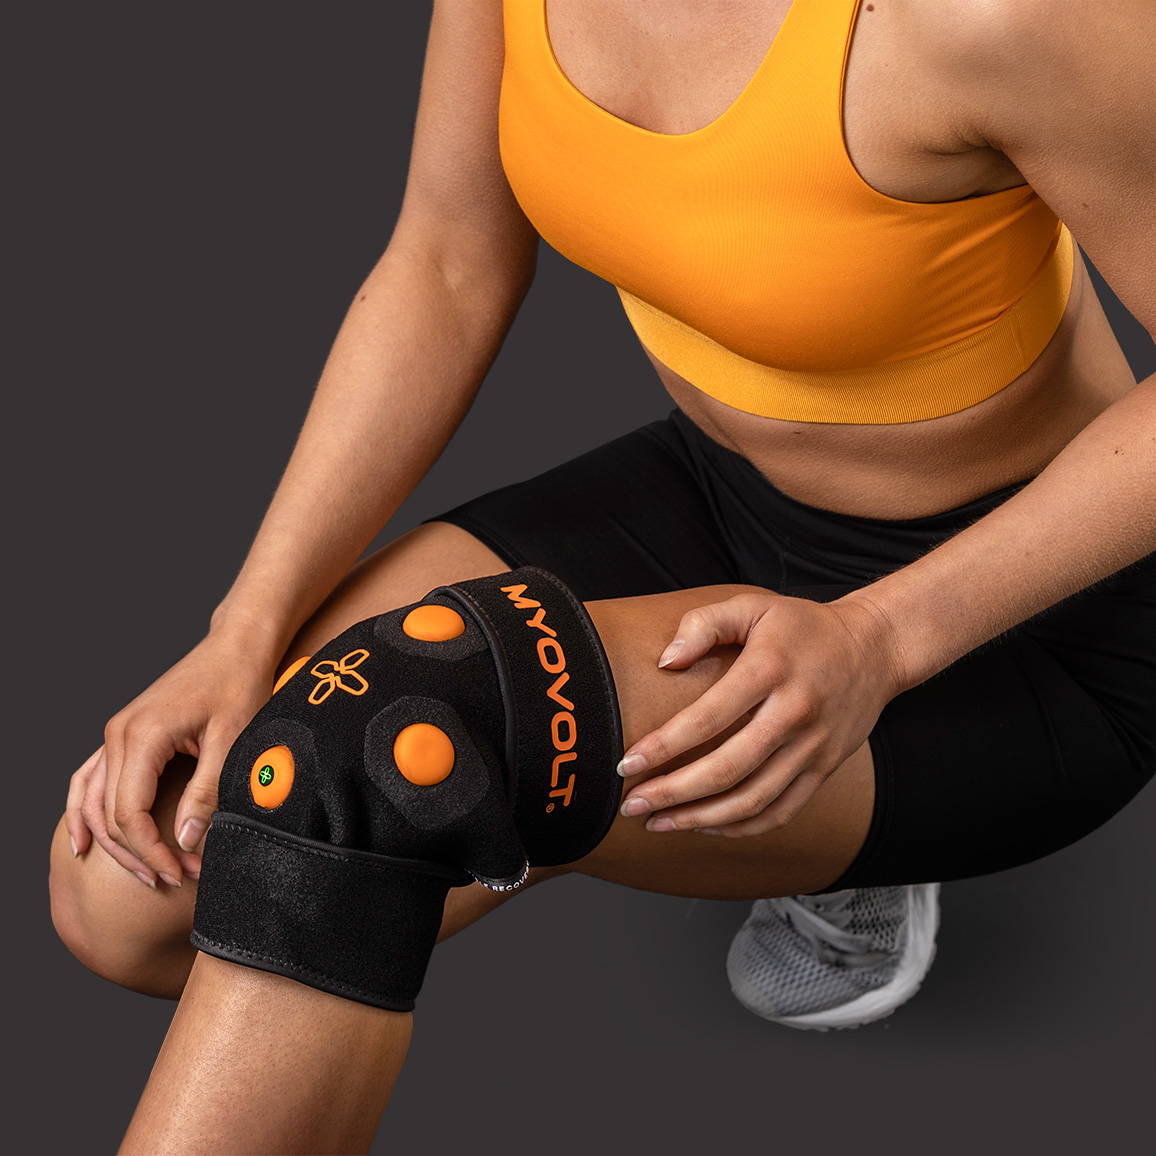 Myovolt Focal Vibration device is worn on the knee for recovery and rehab treatment after running, jumping or intensive exercise. 